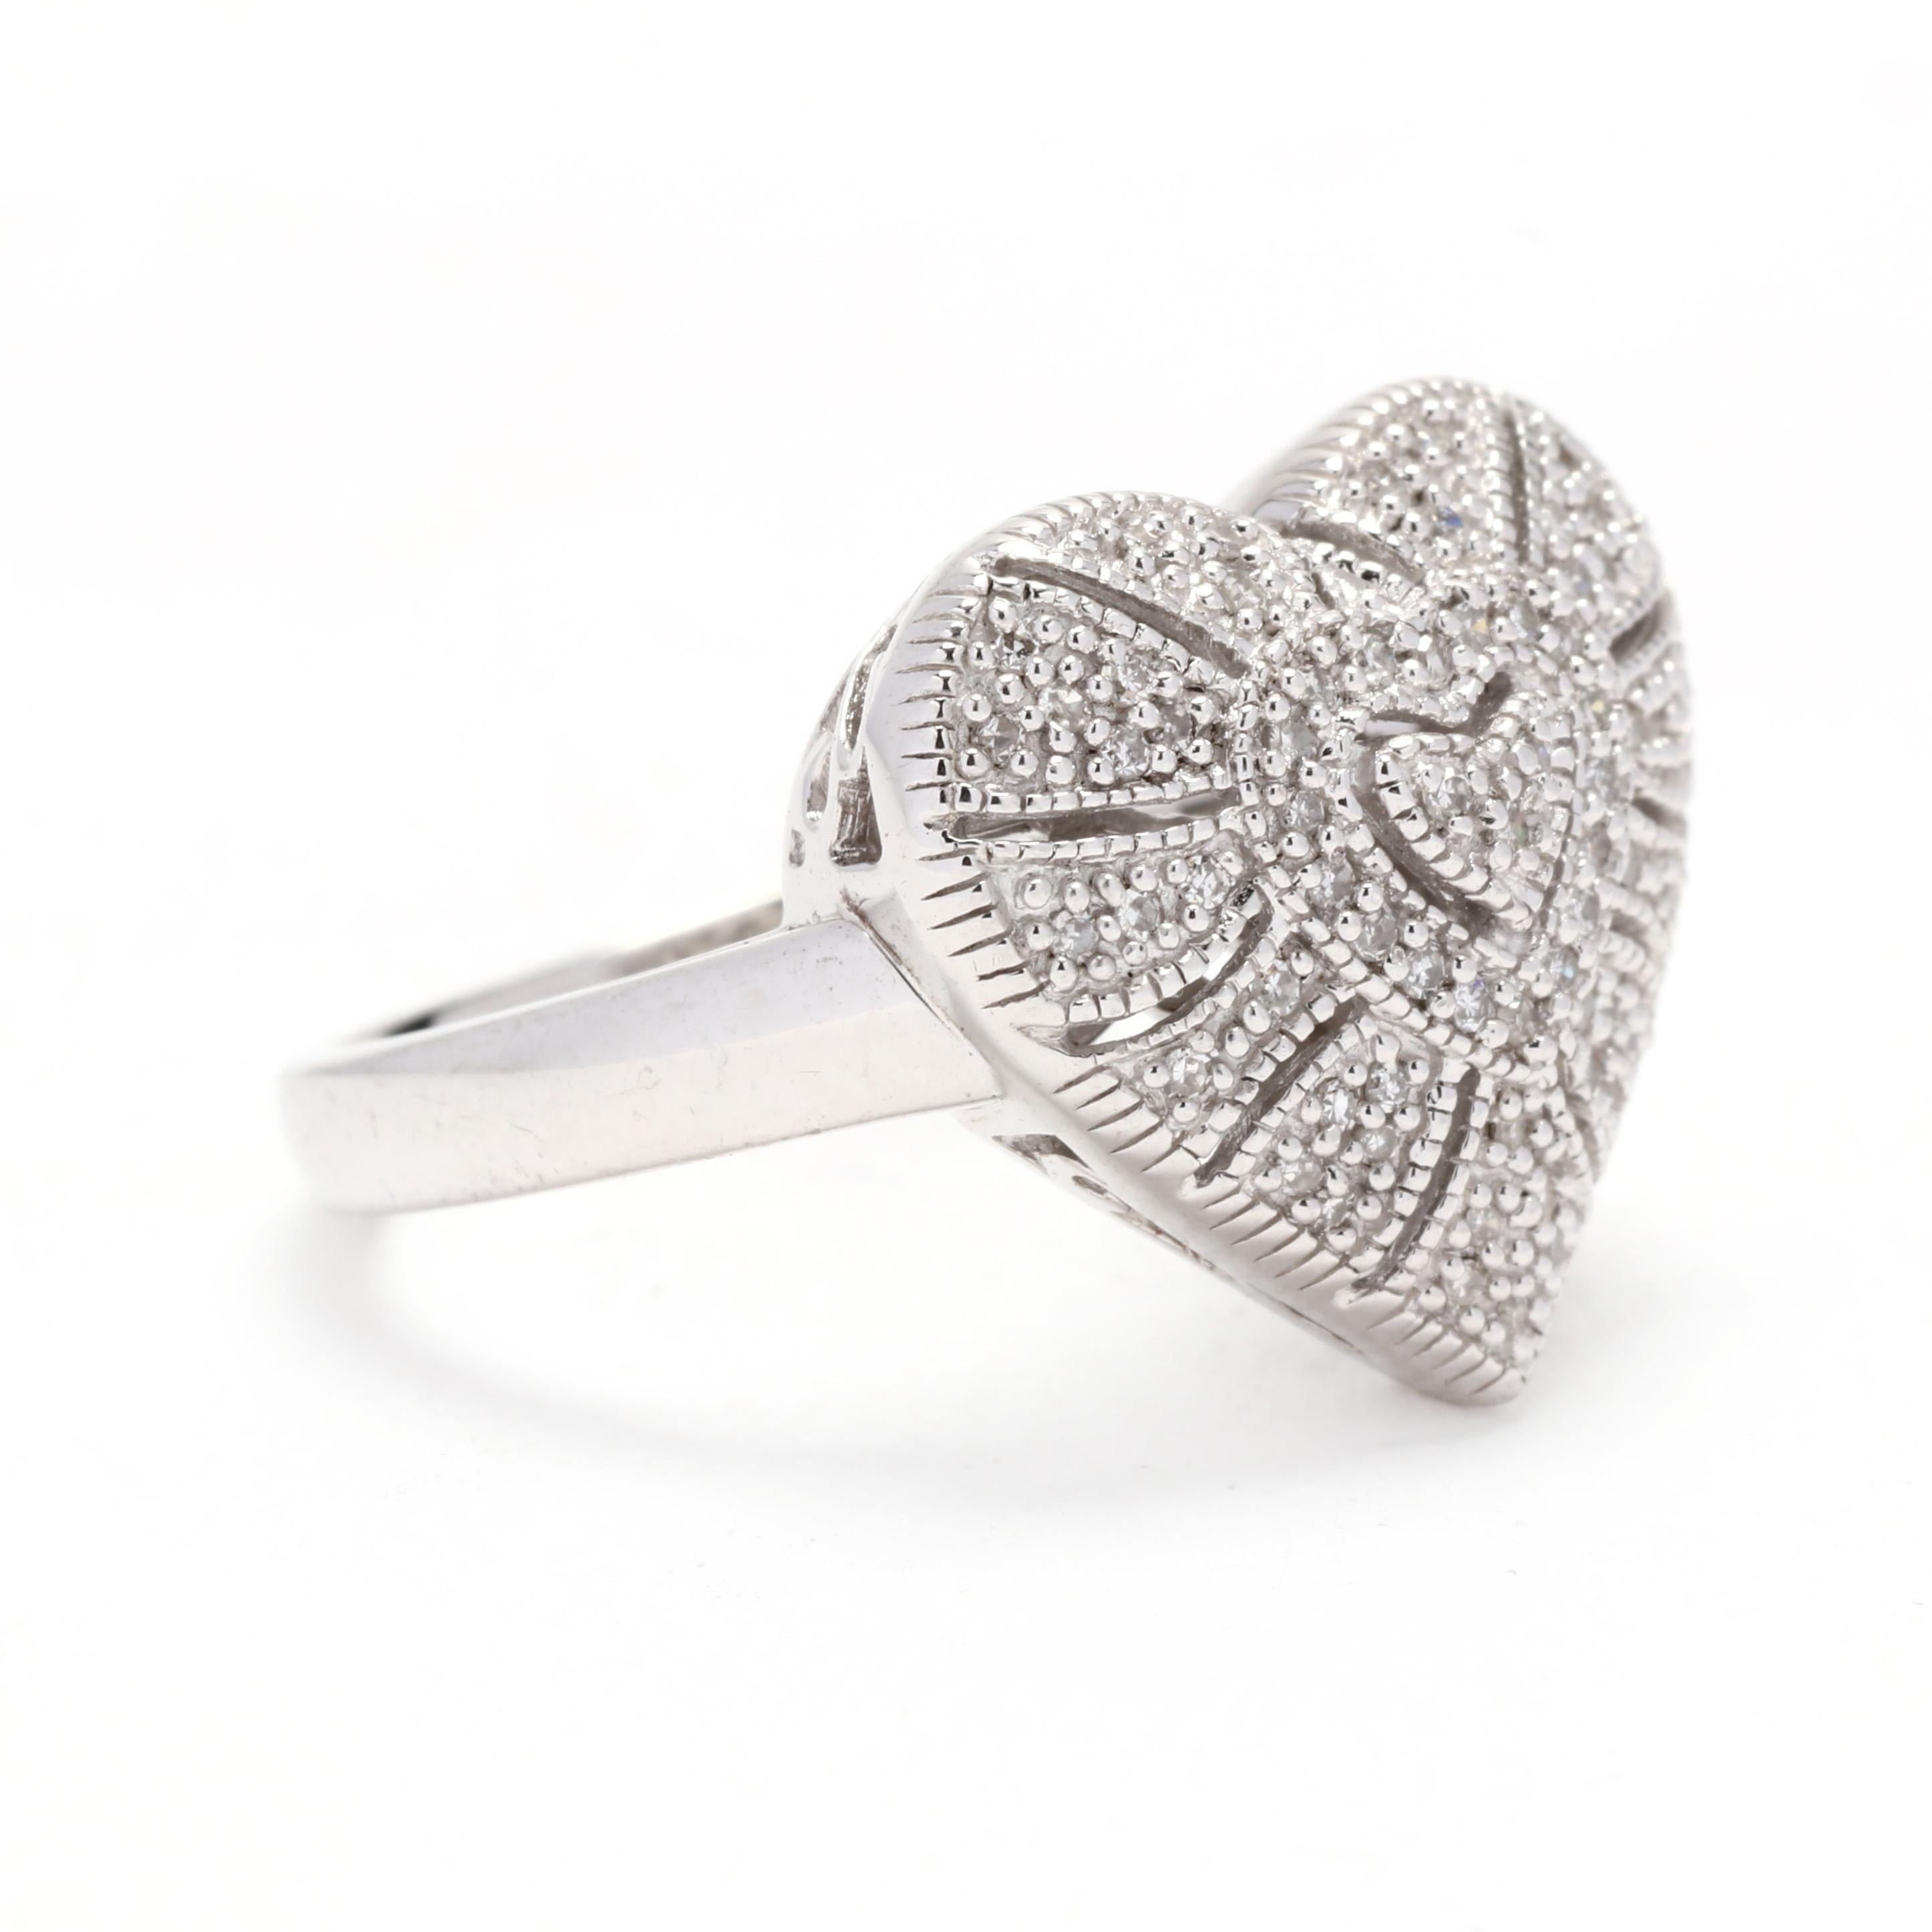 A vintage sterling silver diamond milgrain heart statement ring. This simple ring features a filigree heart motif set with single cut round diamonds with milgrain accents and a tapered band.

Stones:
- diamonds
- single cut round

Ring Size: